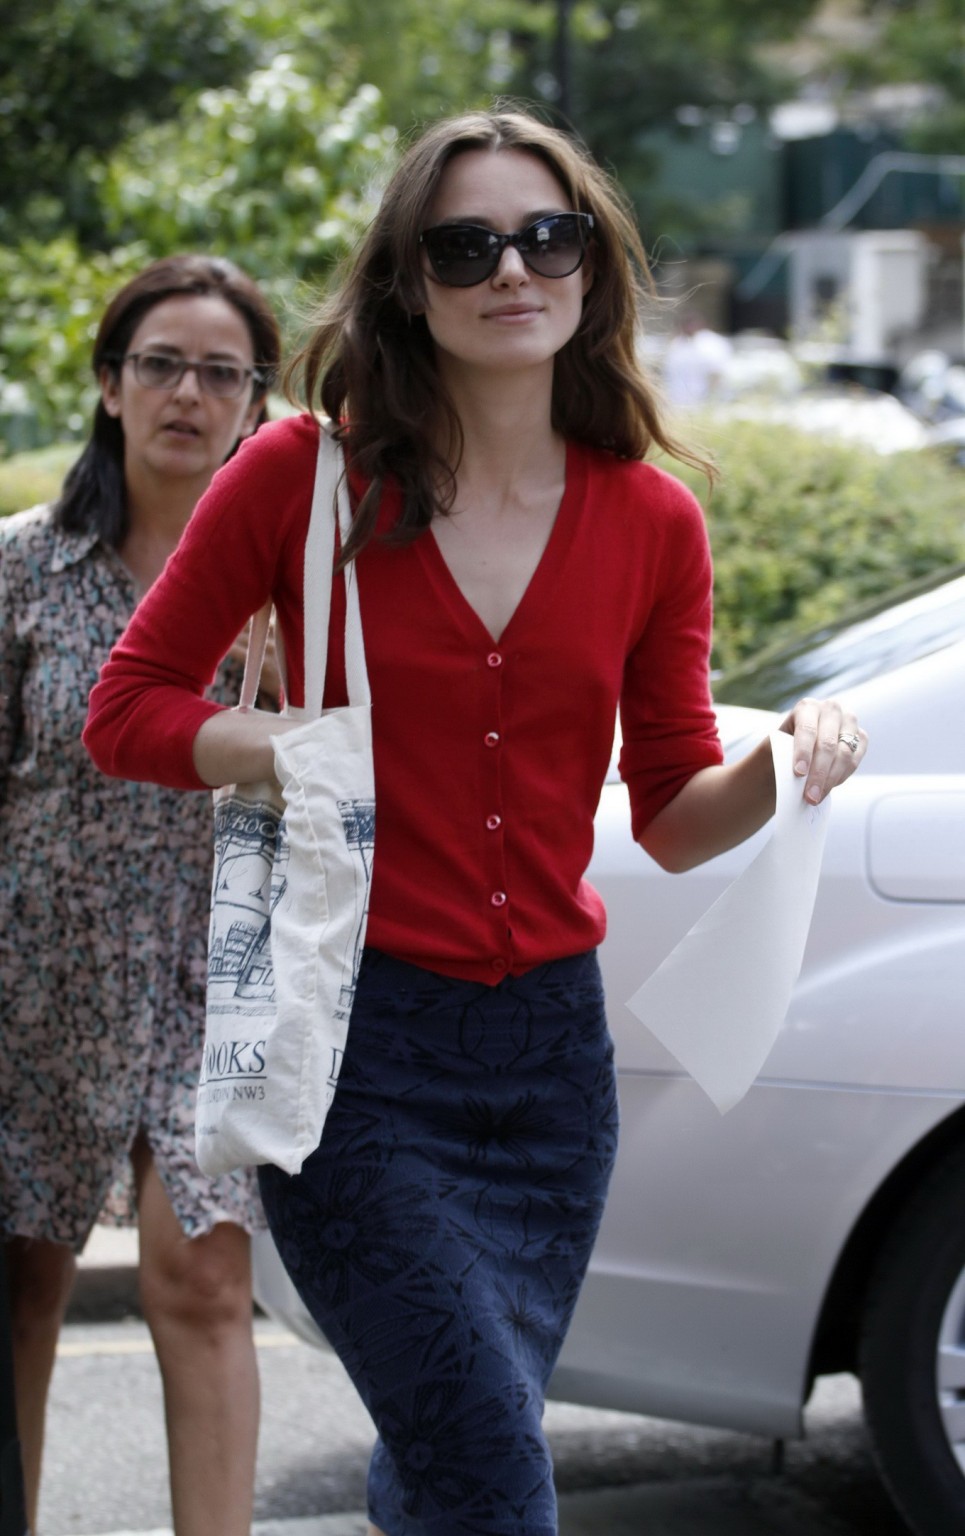 Keira knightley showing hard pokies braless in red top and skirt out in london
 #75194187